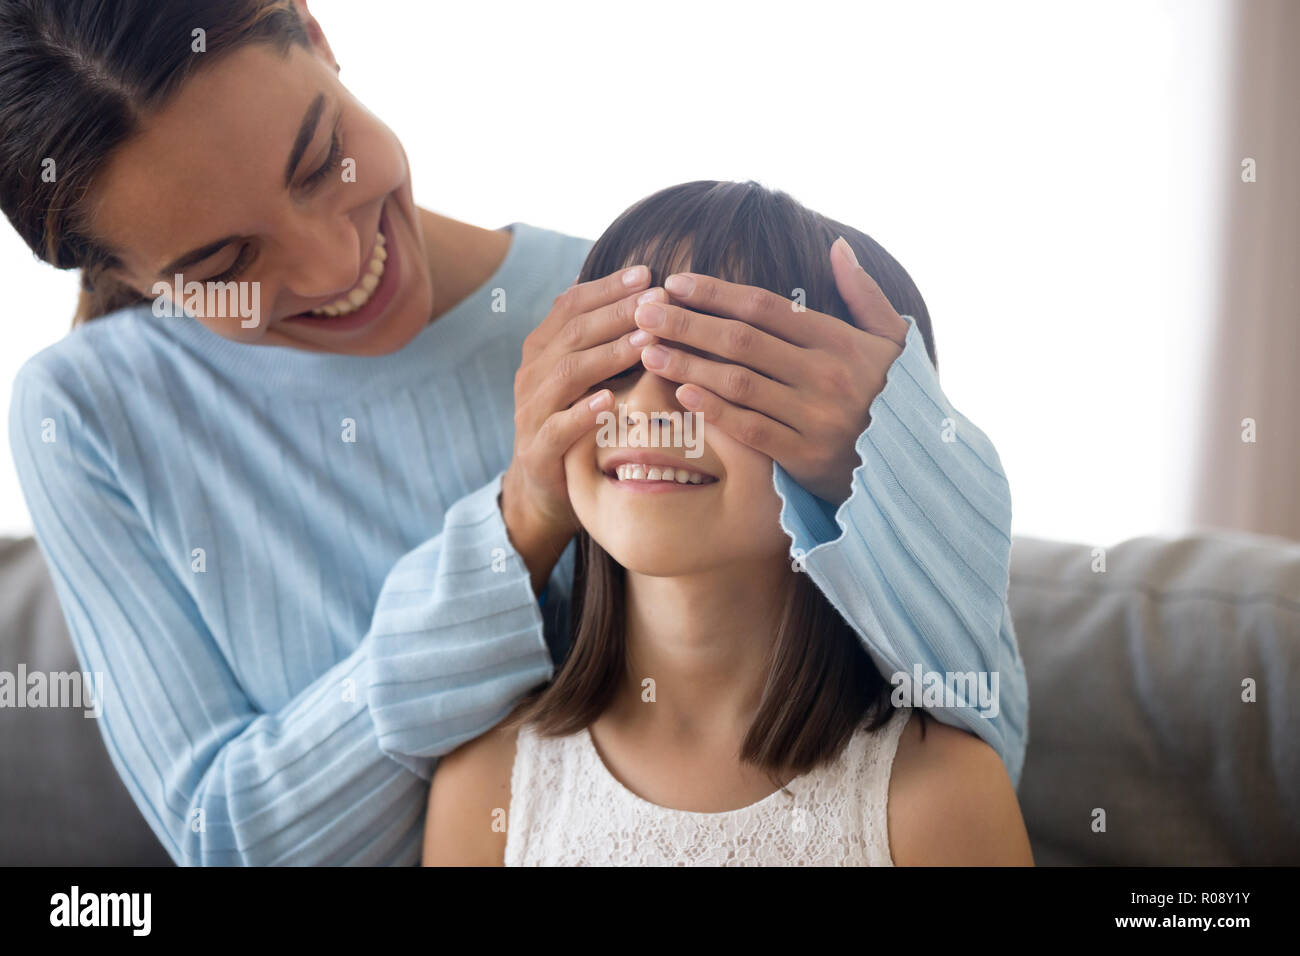 Mother prepare for kid surprise cover her eyes with hands Stock Photo